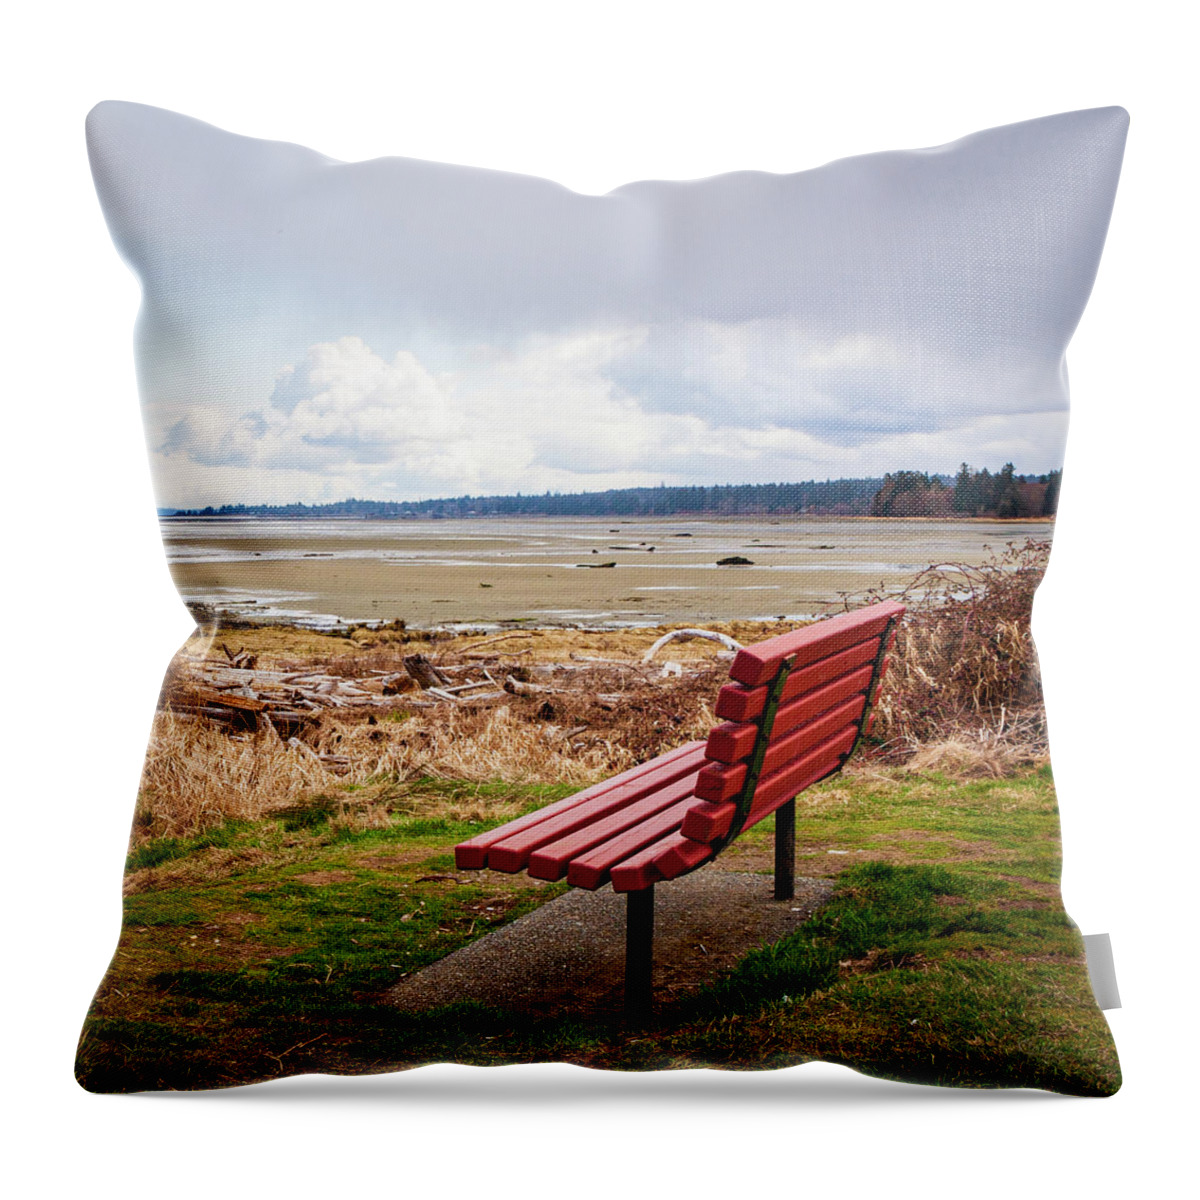 Landscapes Throw Pillow featuring the photograph A Quiet Place by Claude Dalley